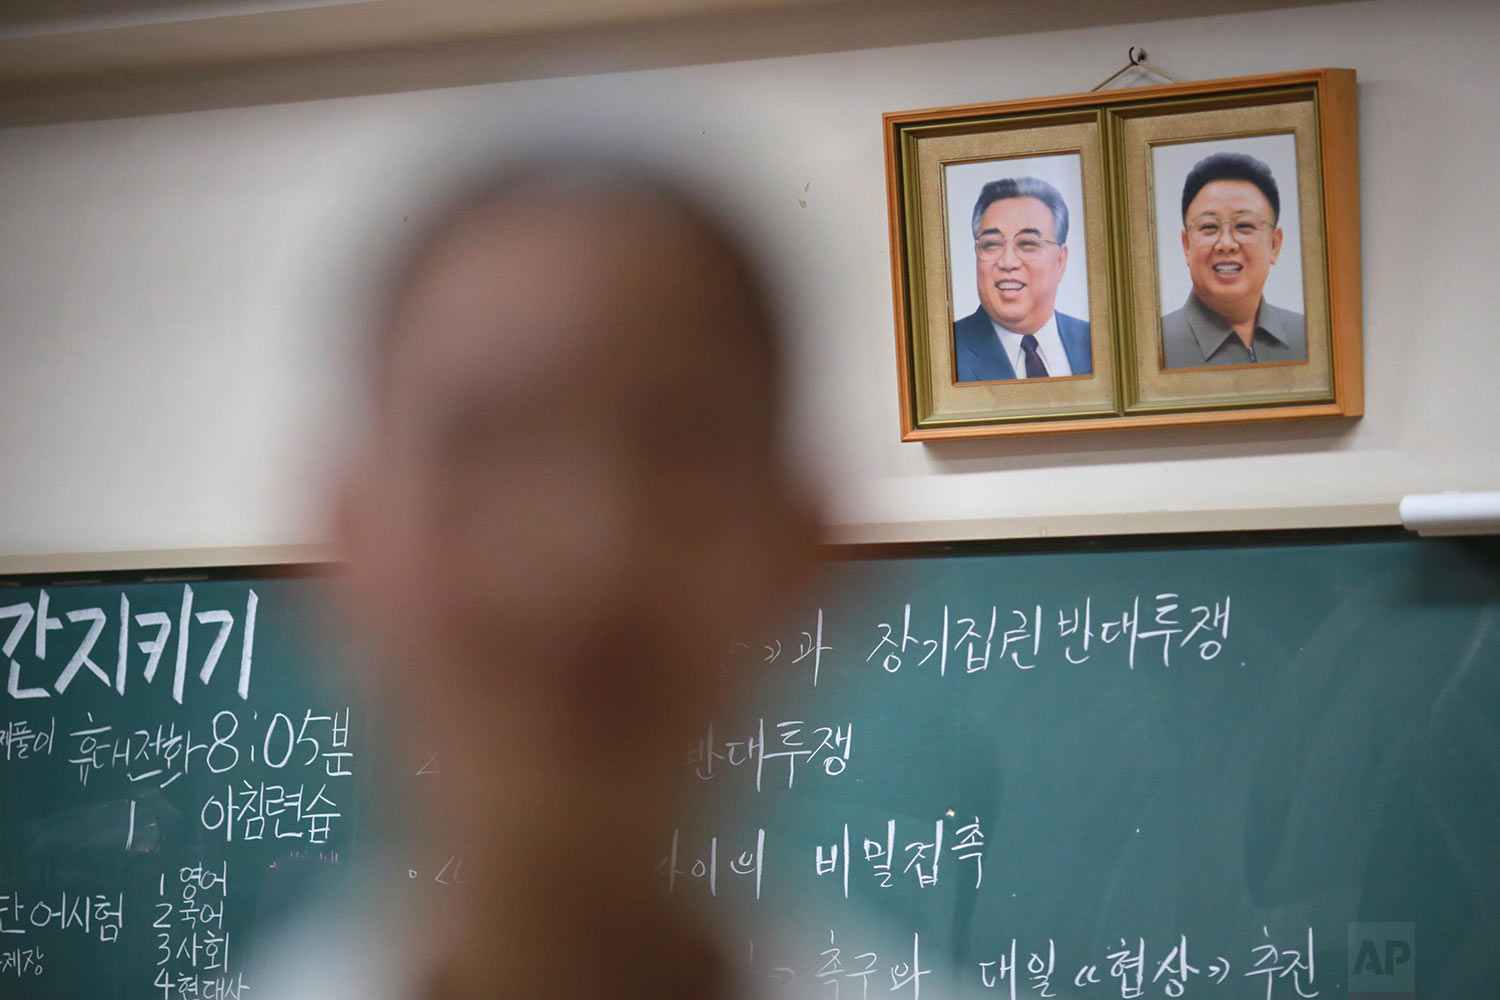  In this Sept. 26, 2017, photo, a student stands near the portraits of the late North Korean leaders Kim Il Sung and Kim Jong Il hanging on a classroom wall in a Korean high school in Tokyo. Many third- and fourth-generation descendants of Koreans br